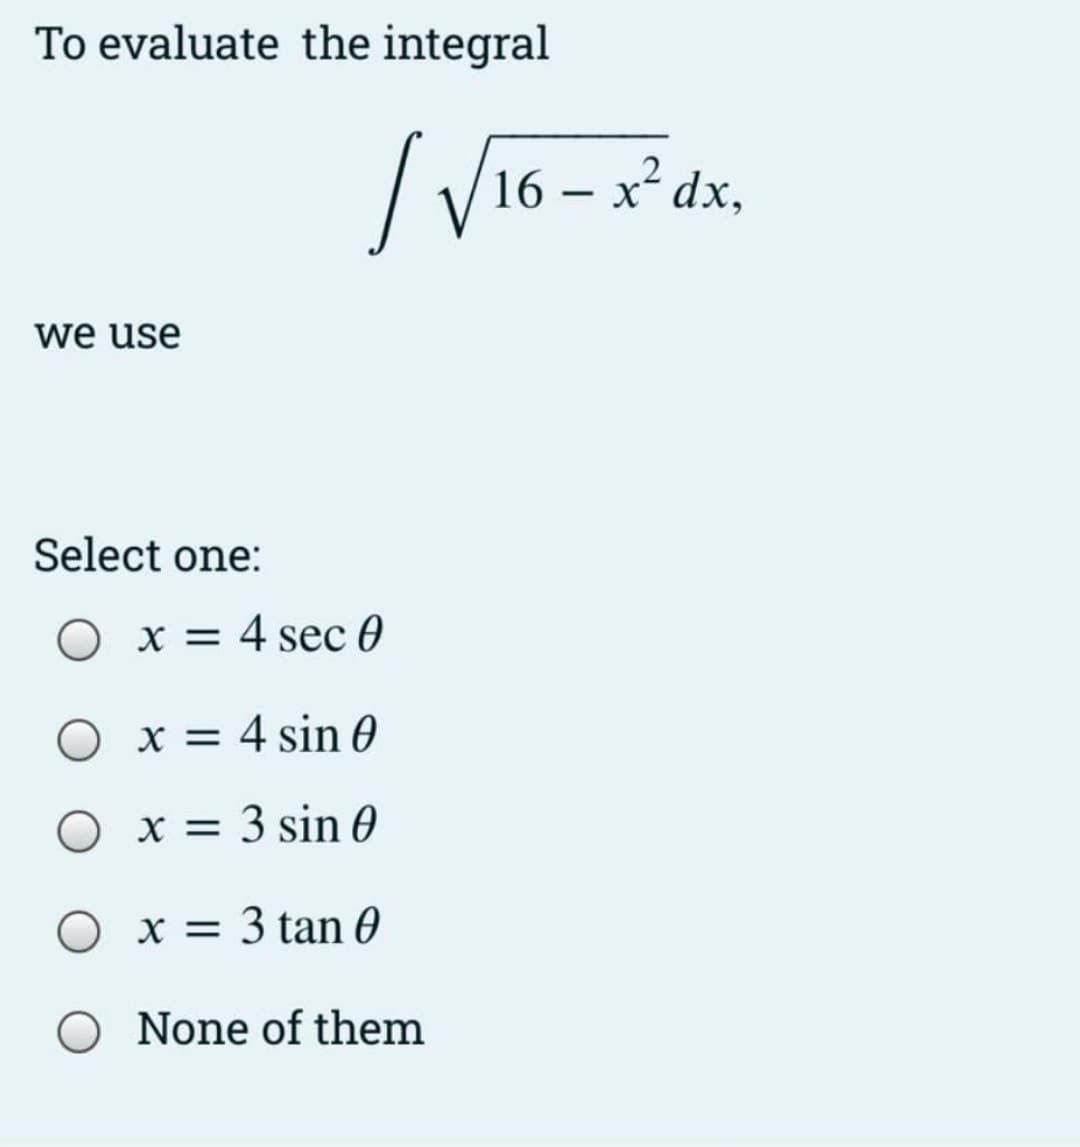 To evaluate the integral
16 – x² dx,
we use
Select one:
O x = 4 sec 0
O x = 4 sin 0
O x = 3 sin 0
O x = 3 tan 0
O None of them
